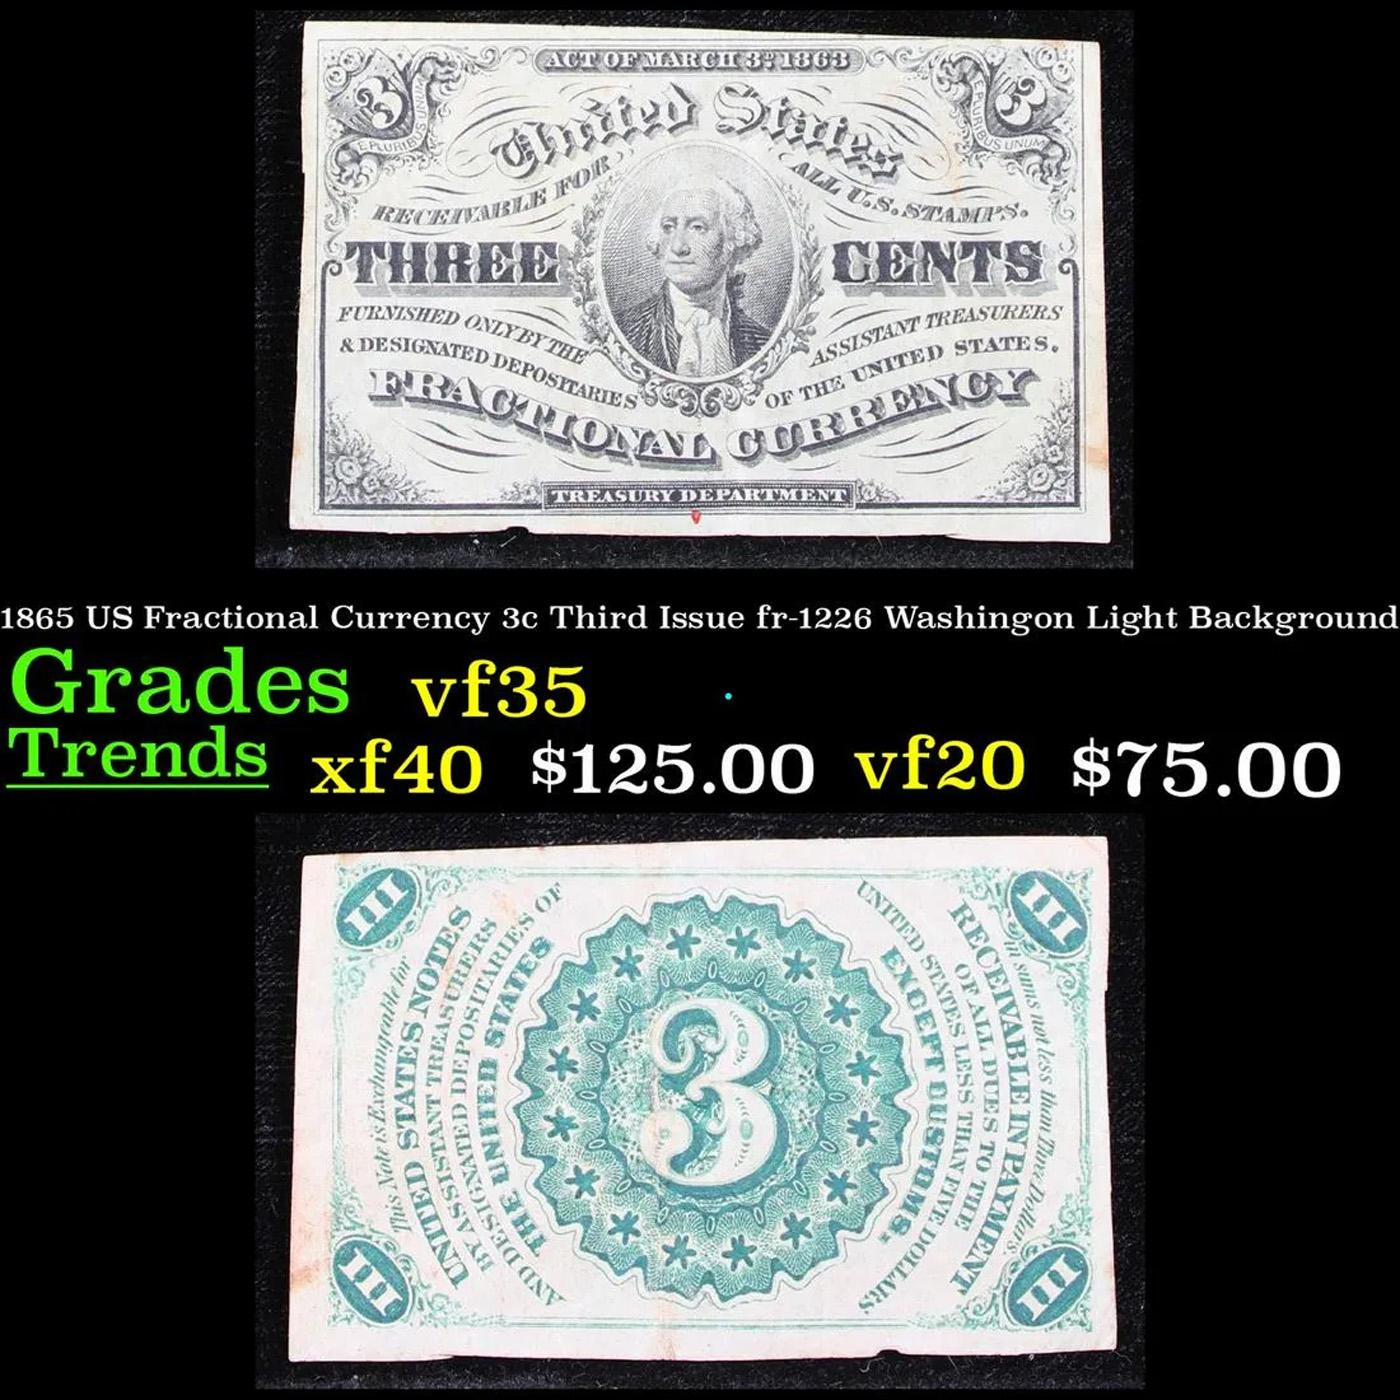 1865 US Fractional Currency 3c Third Issue fr-1226 Washingon Light Background Grades vf++